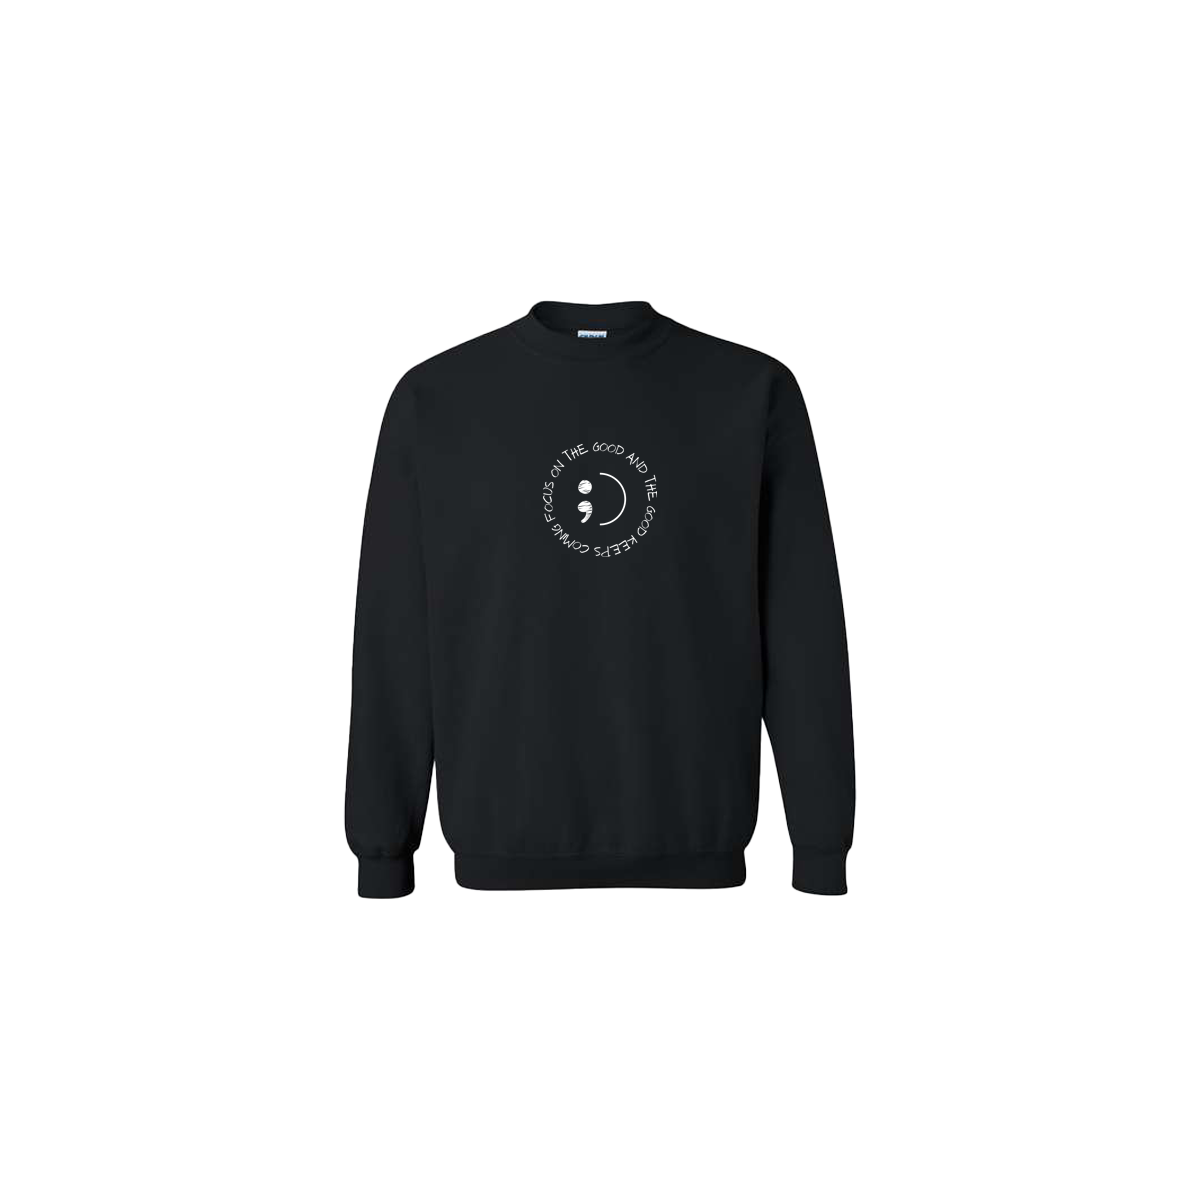 Focus on The Good And The Good Keeps Coming Embroidered Black Crewneck - Mental Health Awareness Clothing